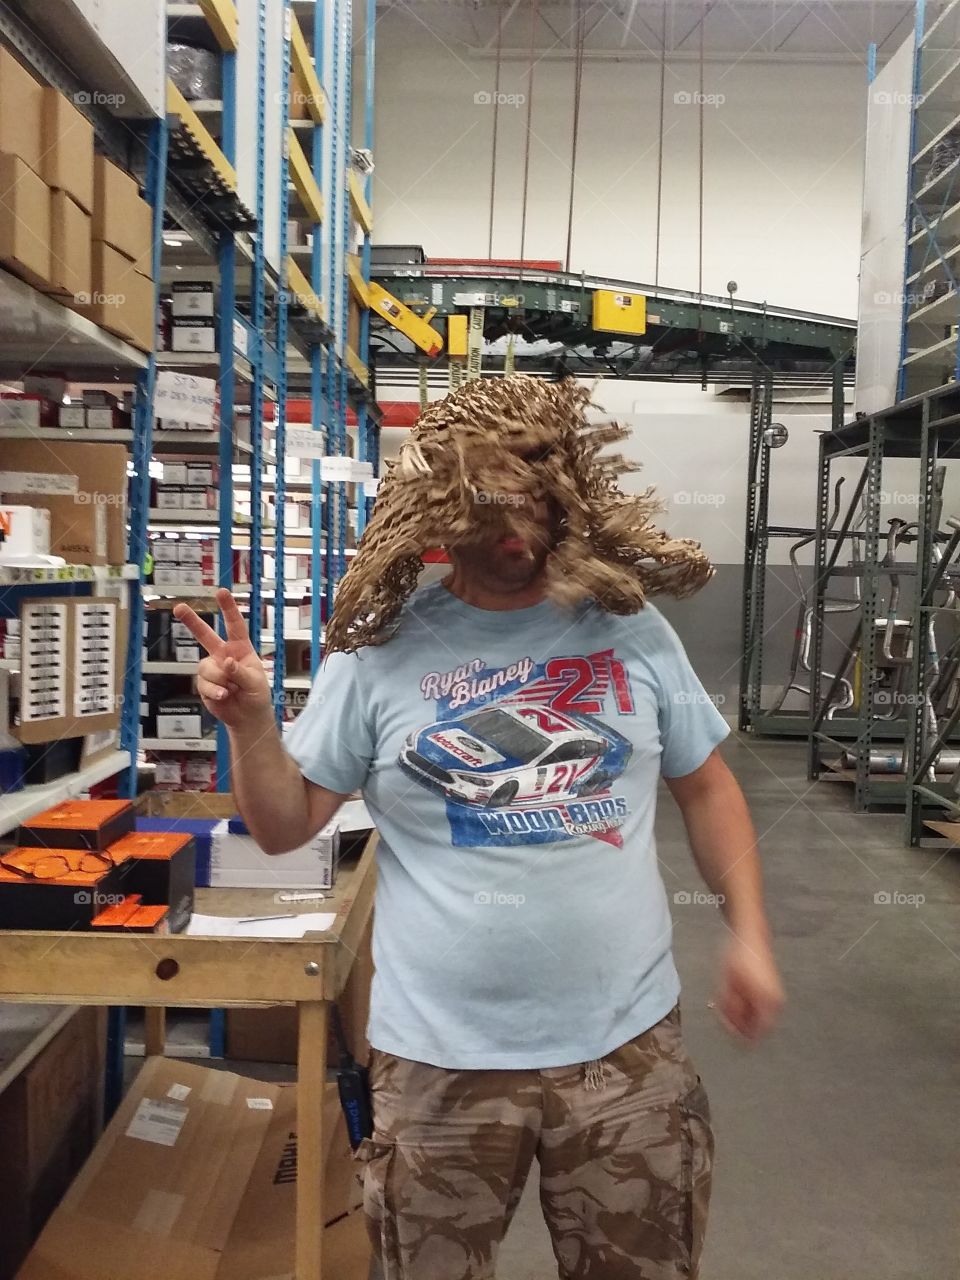 acting goofy at work...taking the edge off of a tough day!